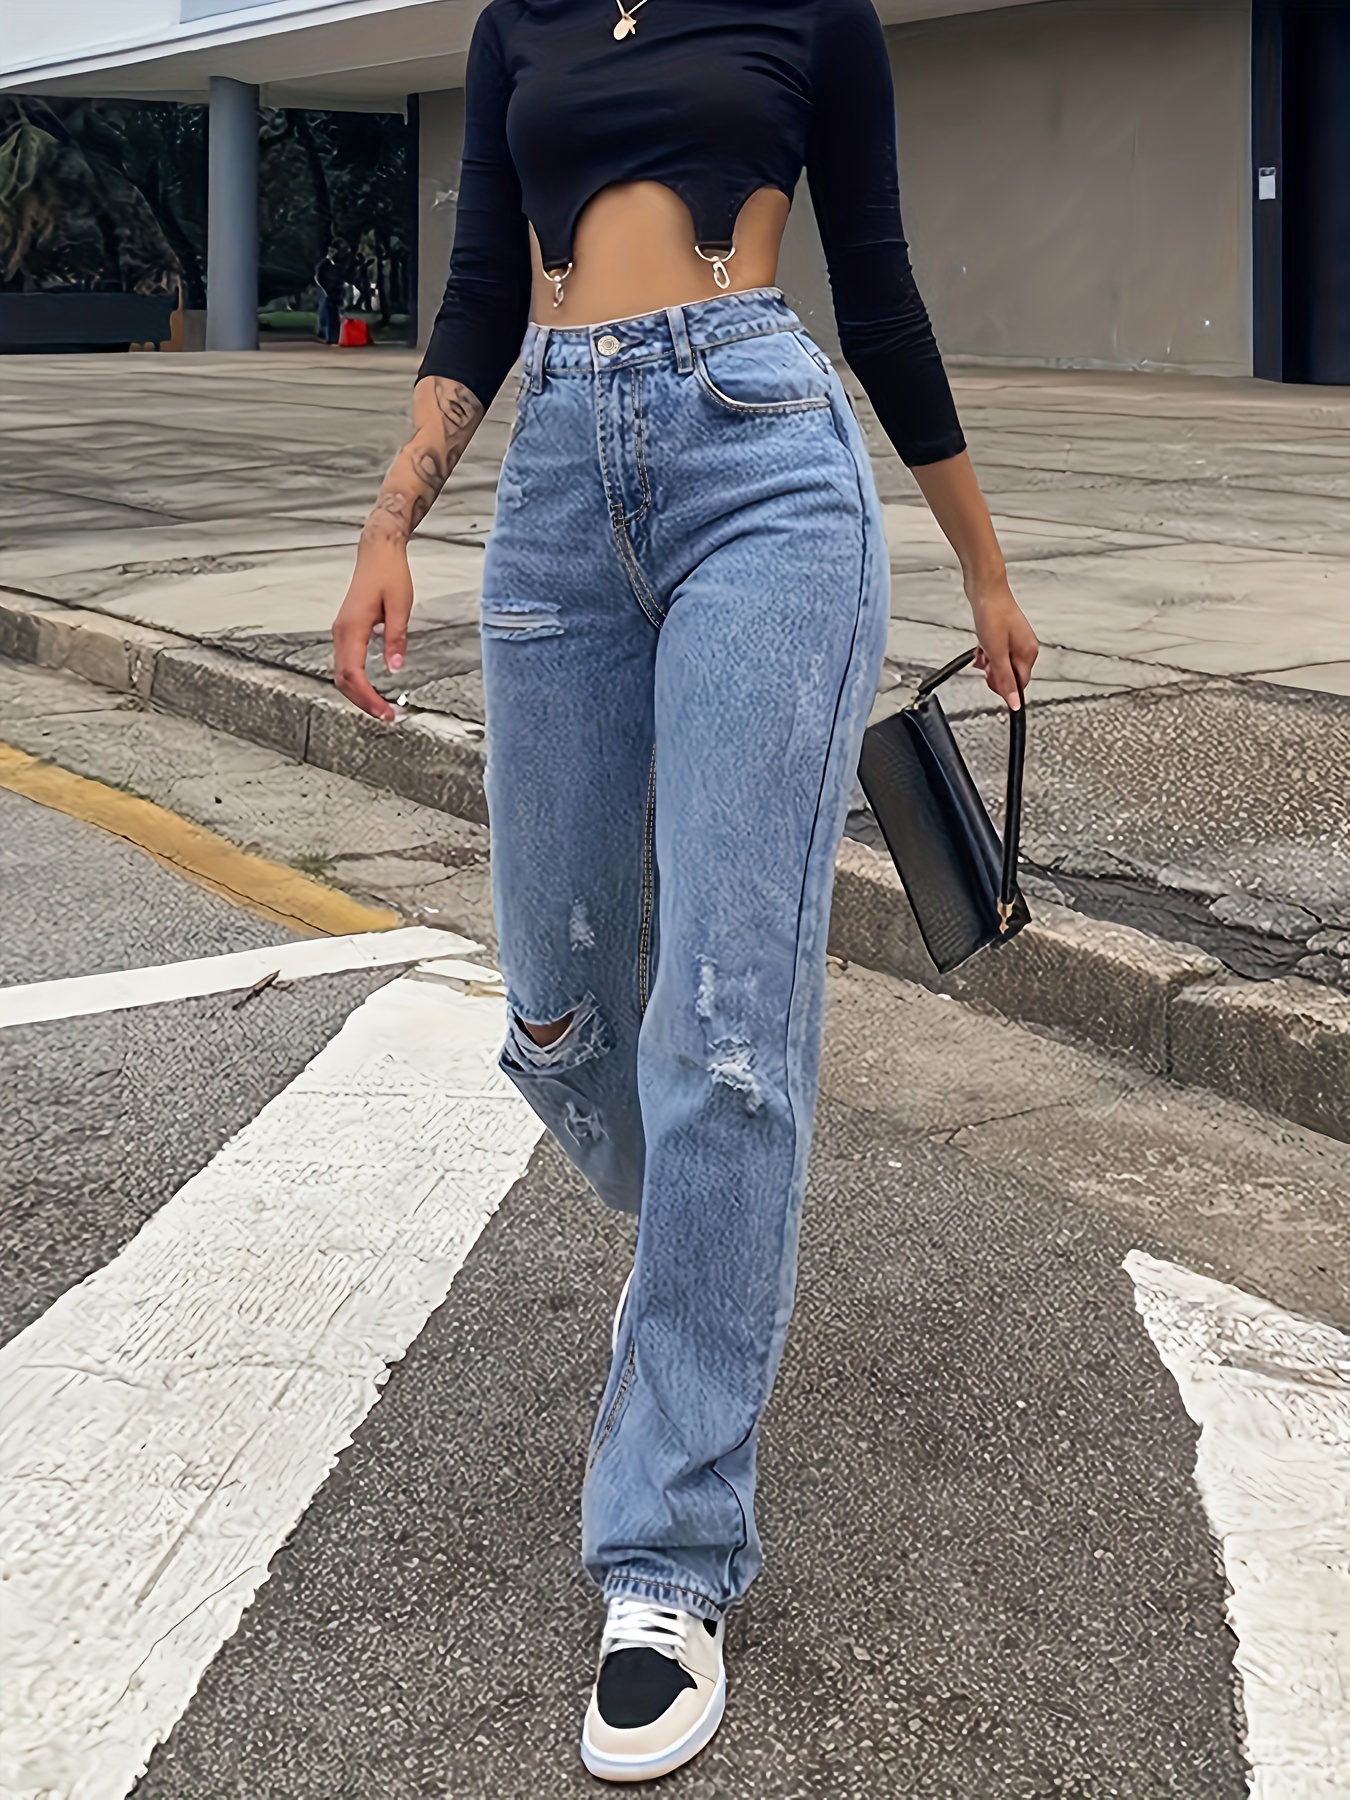 JEANS TIRO ALTO  Crop top outfits, Cute outfits, Casual outfits